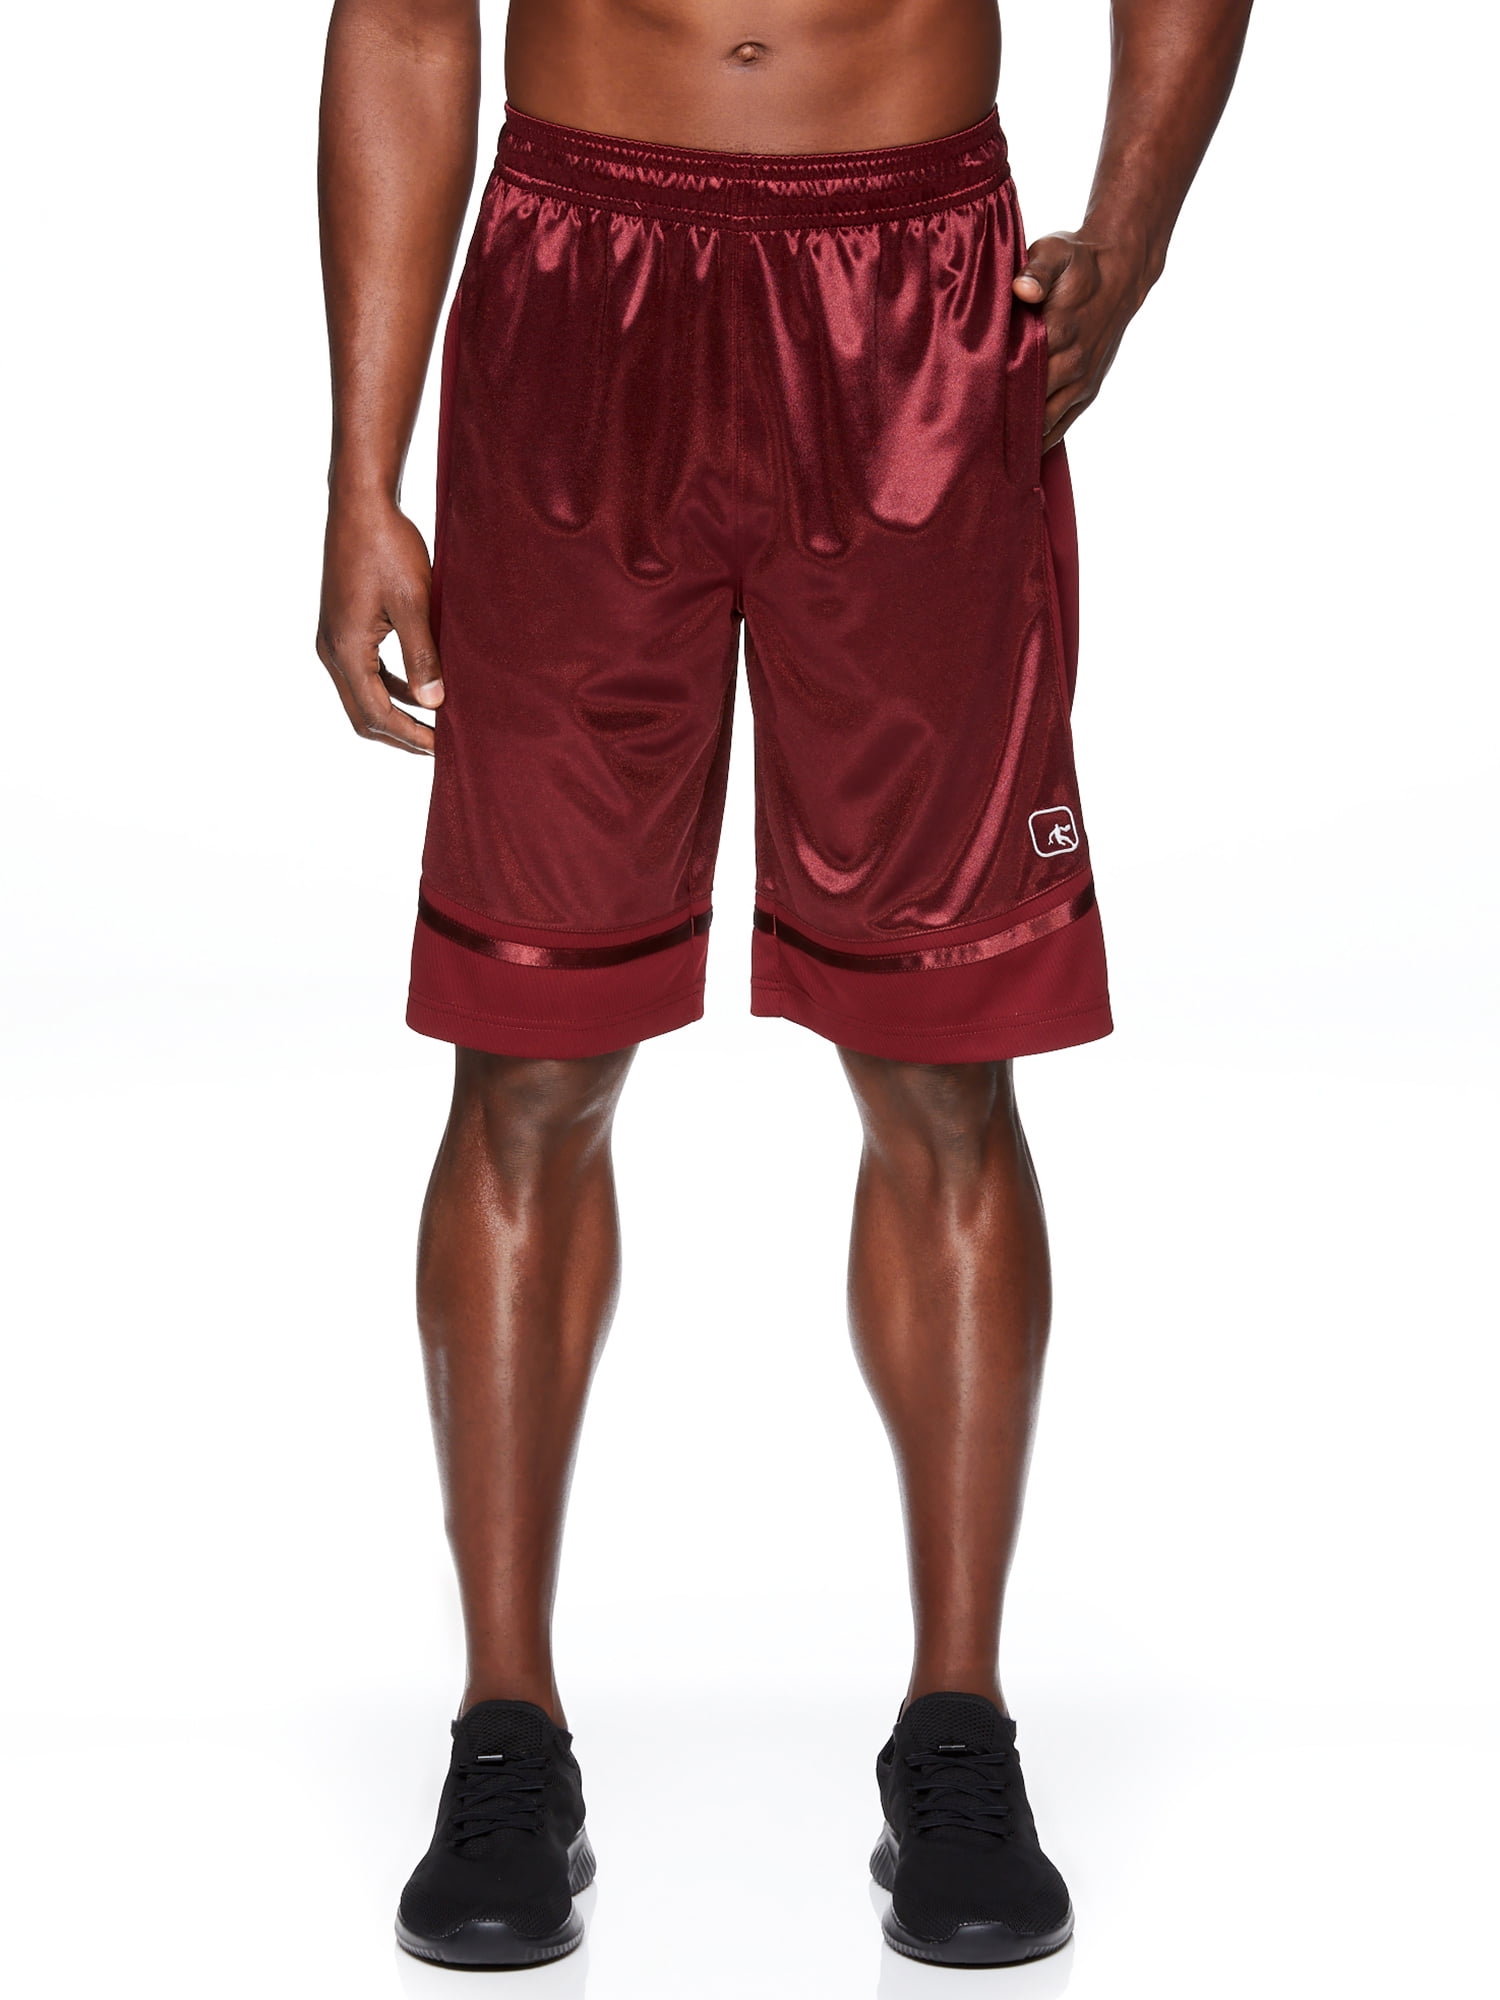 Details about   **** New Mens Basketball Shorts by And1.**Adjustable Elastic Waist Size S.**** 